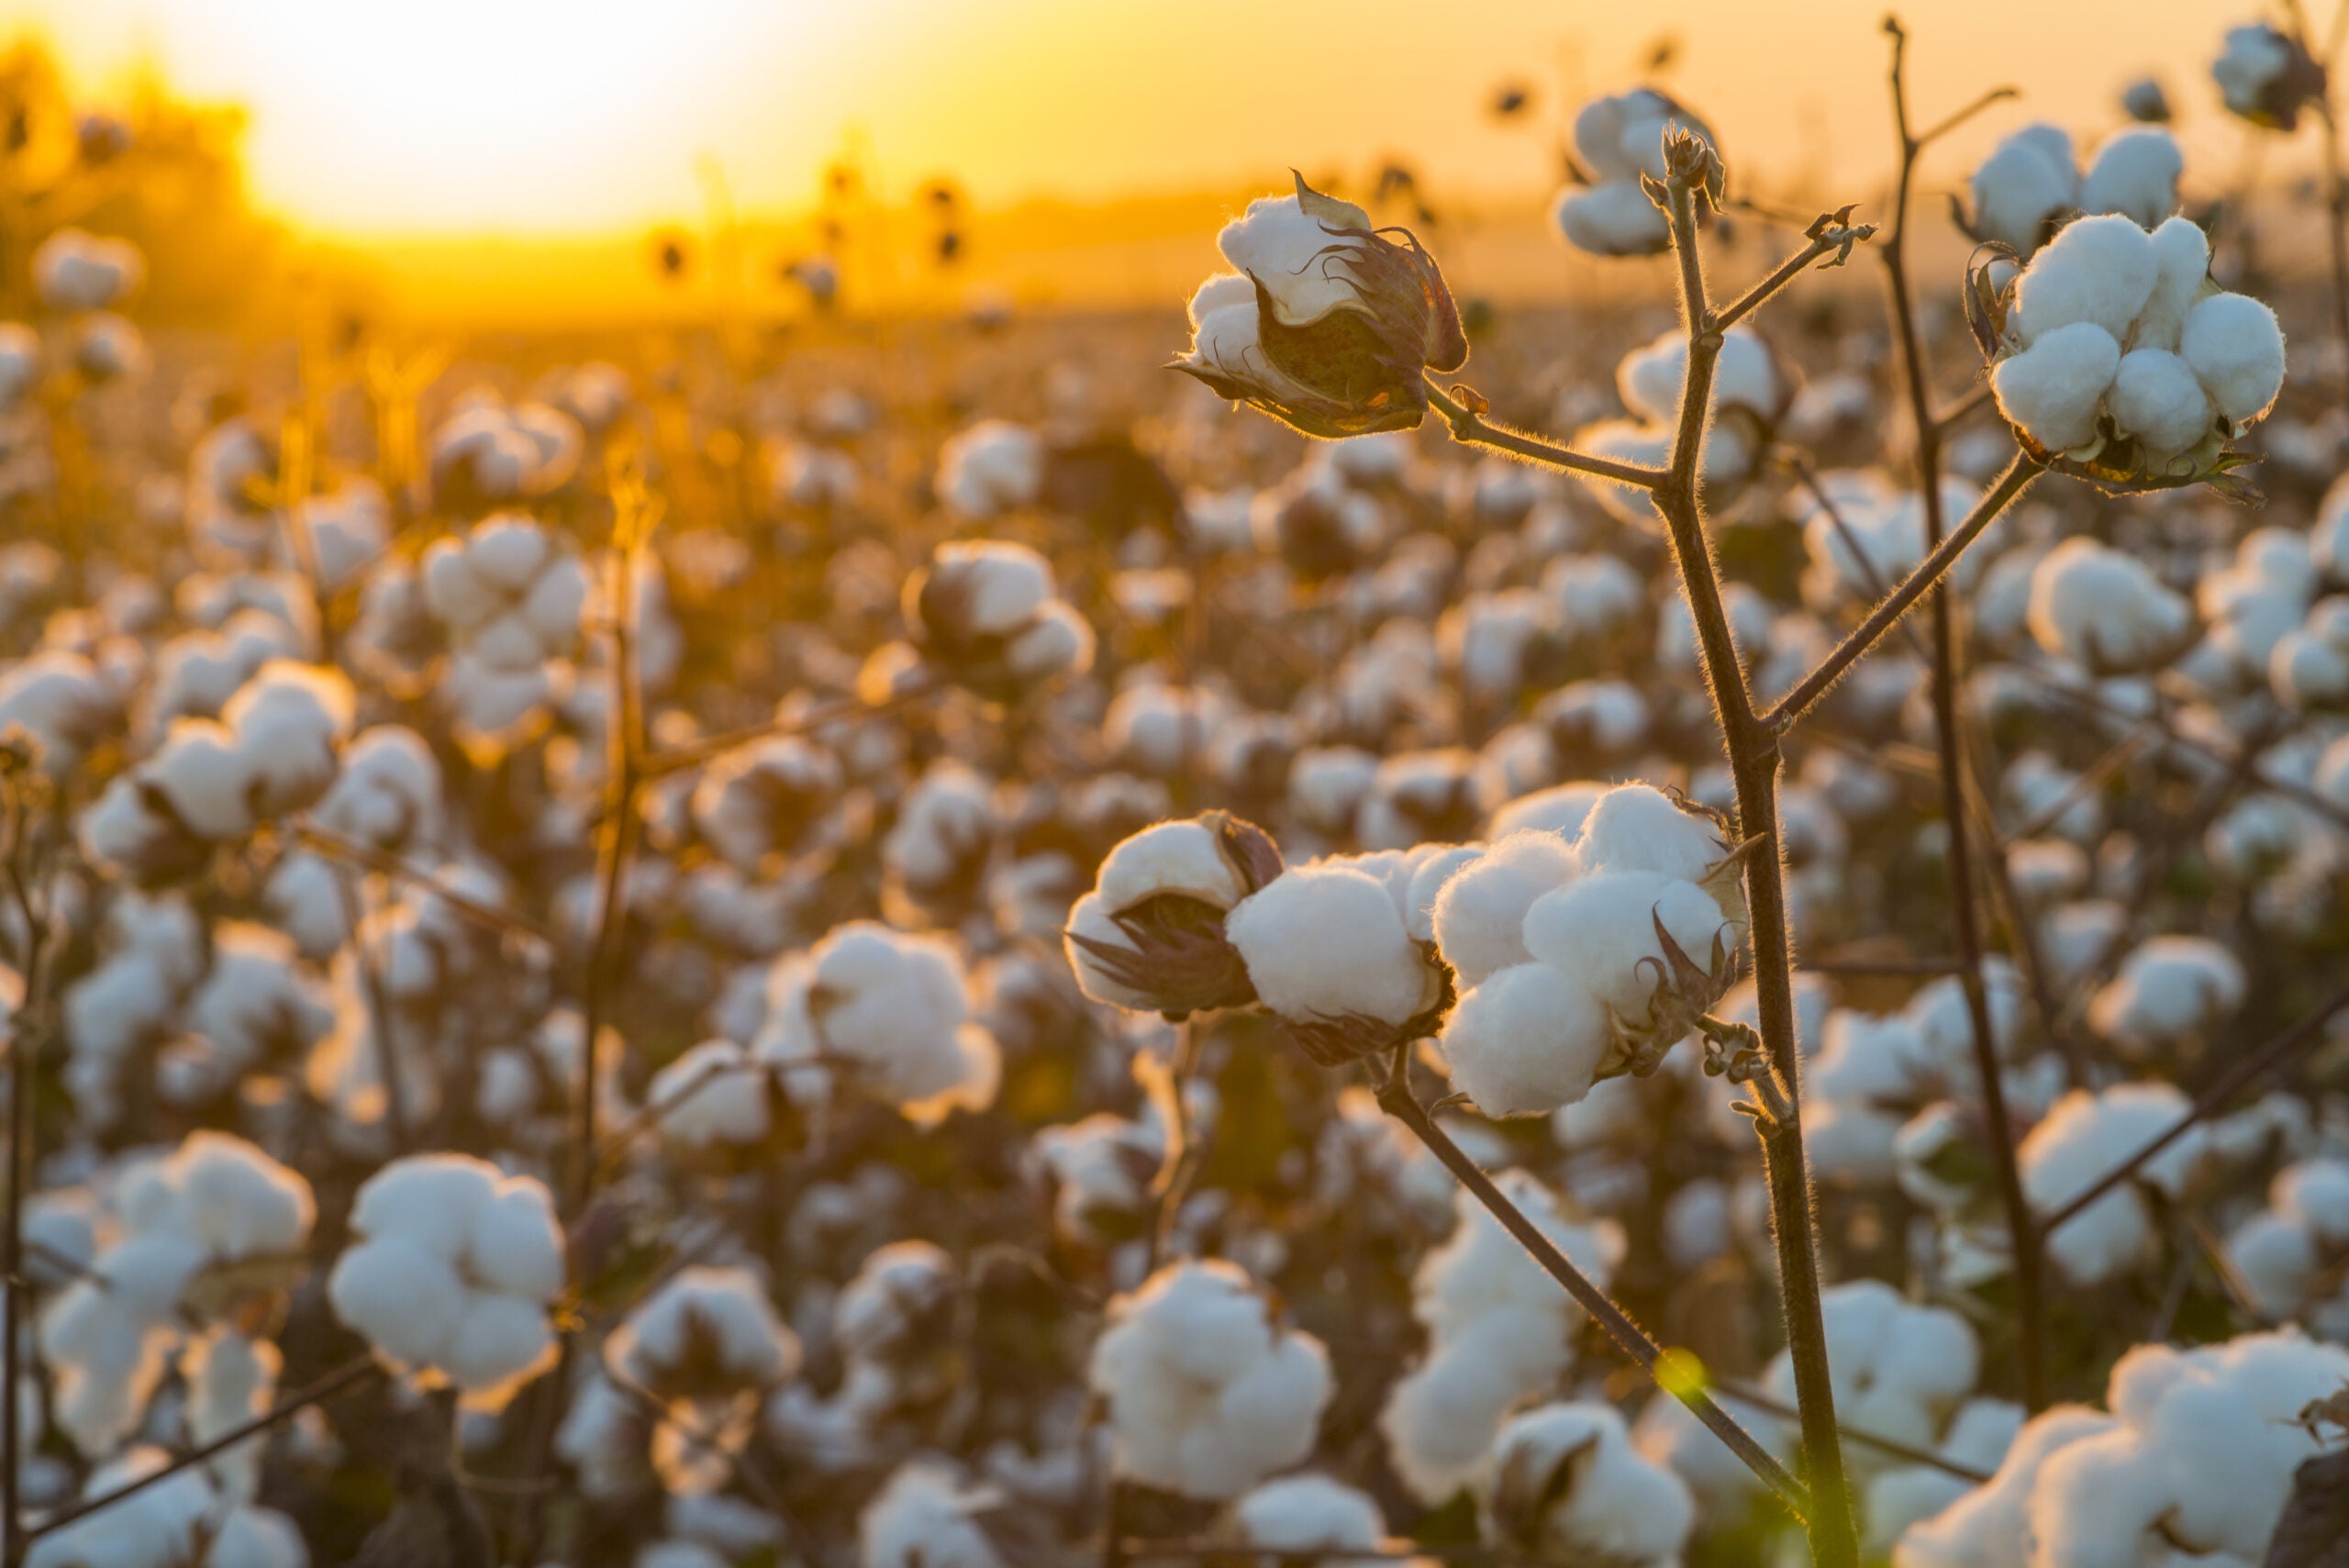 Supply chain issues to impact US cotton industry growth in 2023